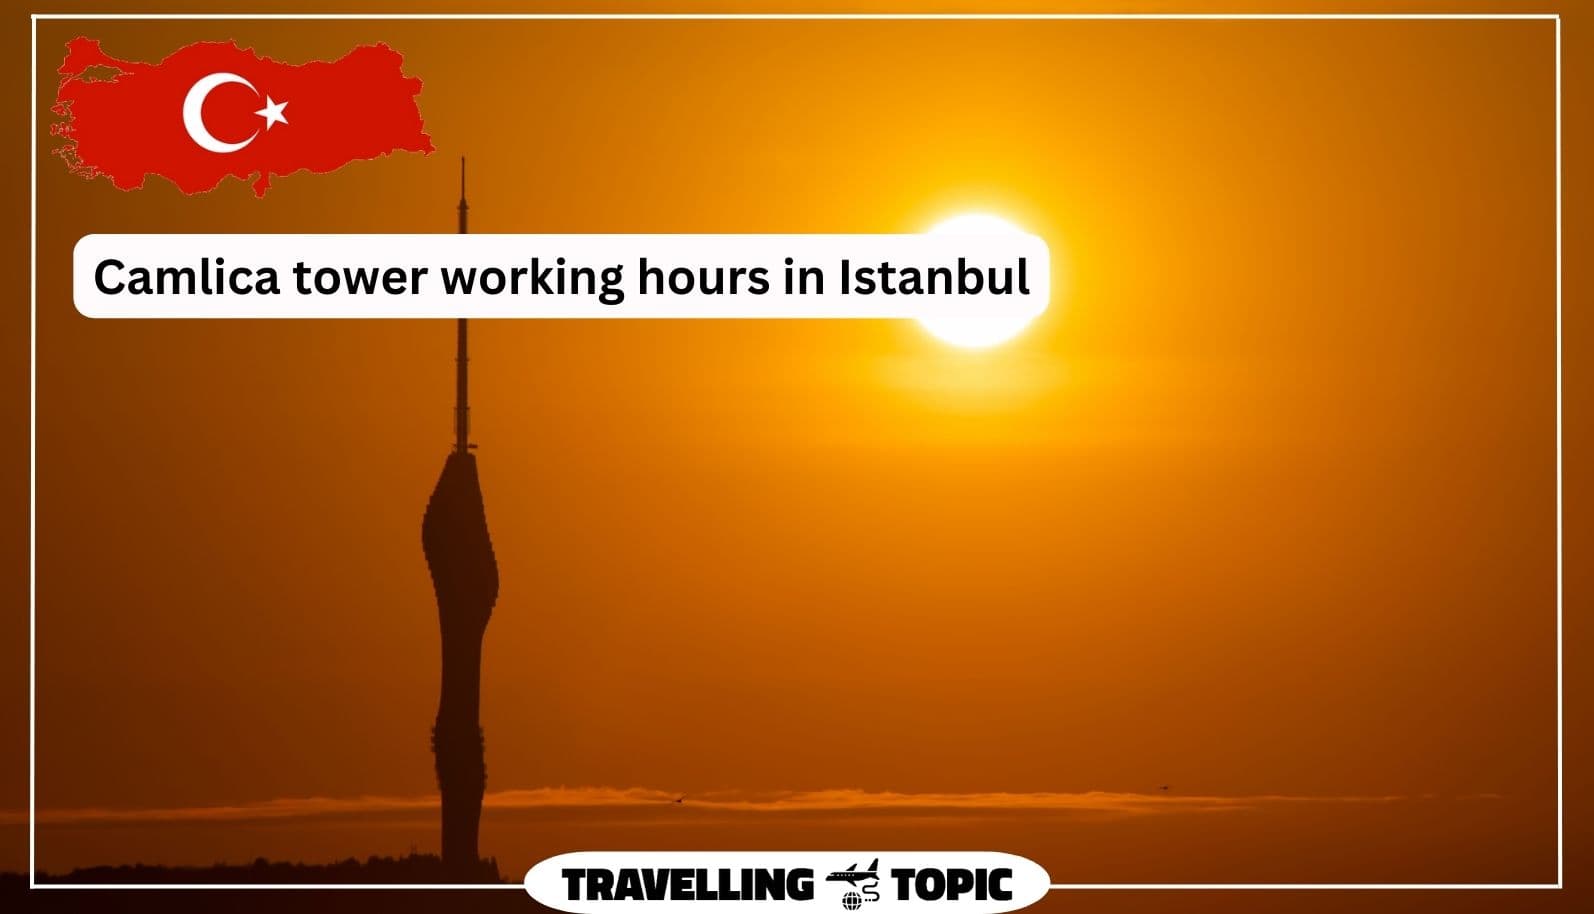 Camlica tower working hours in Istanbul